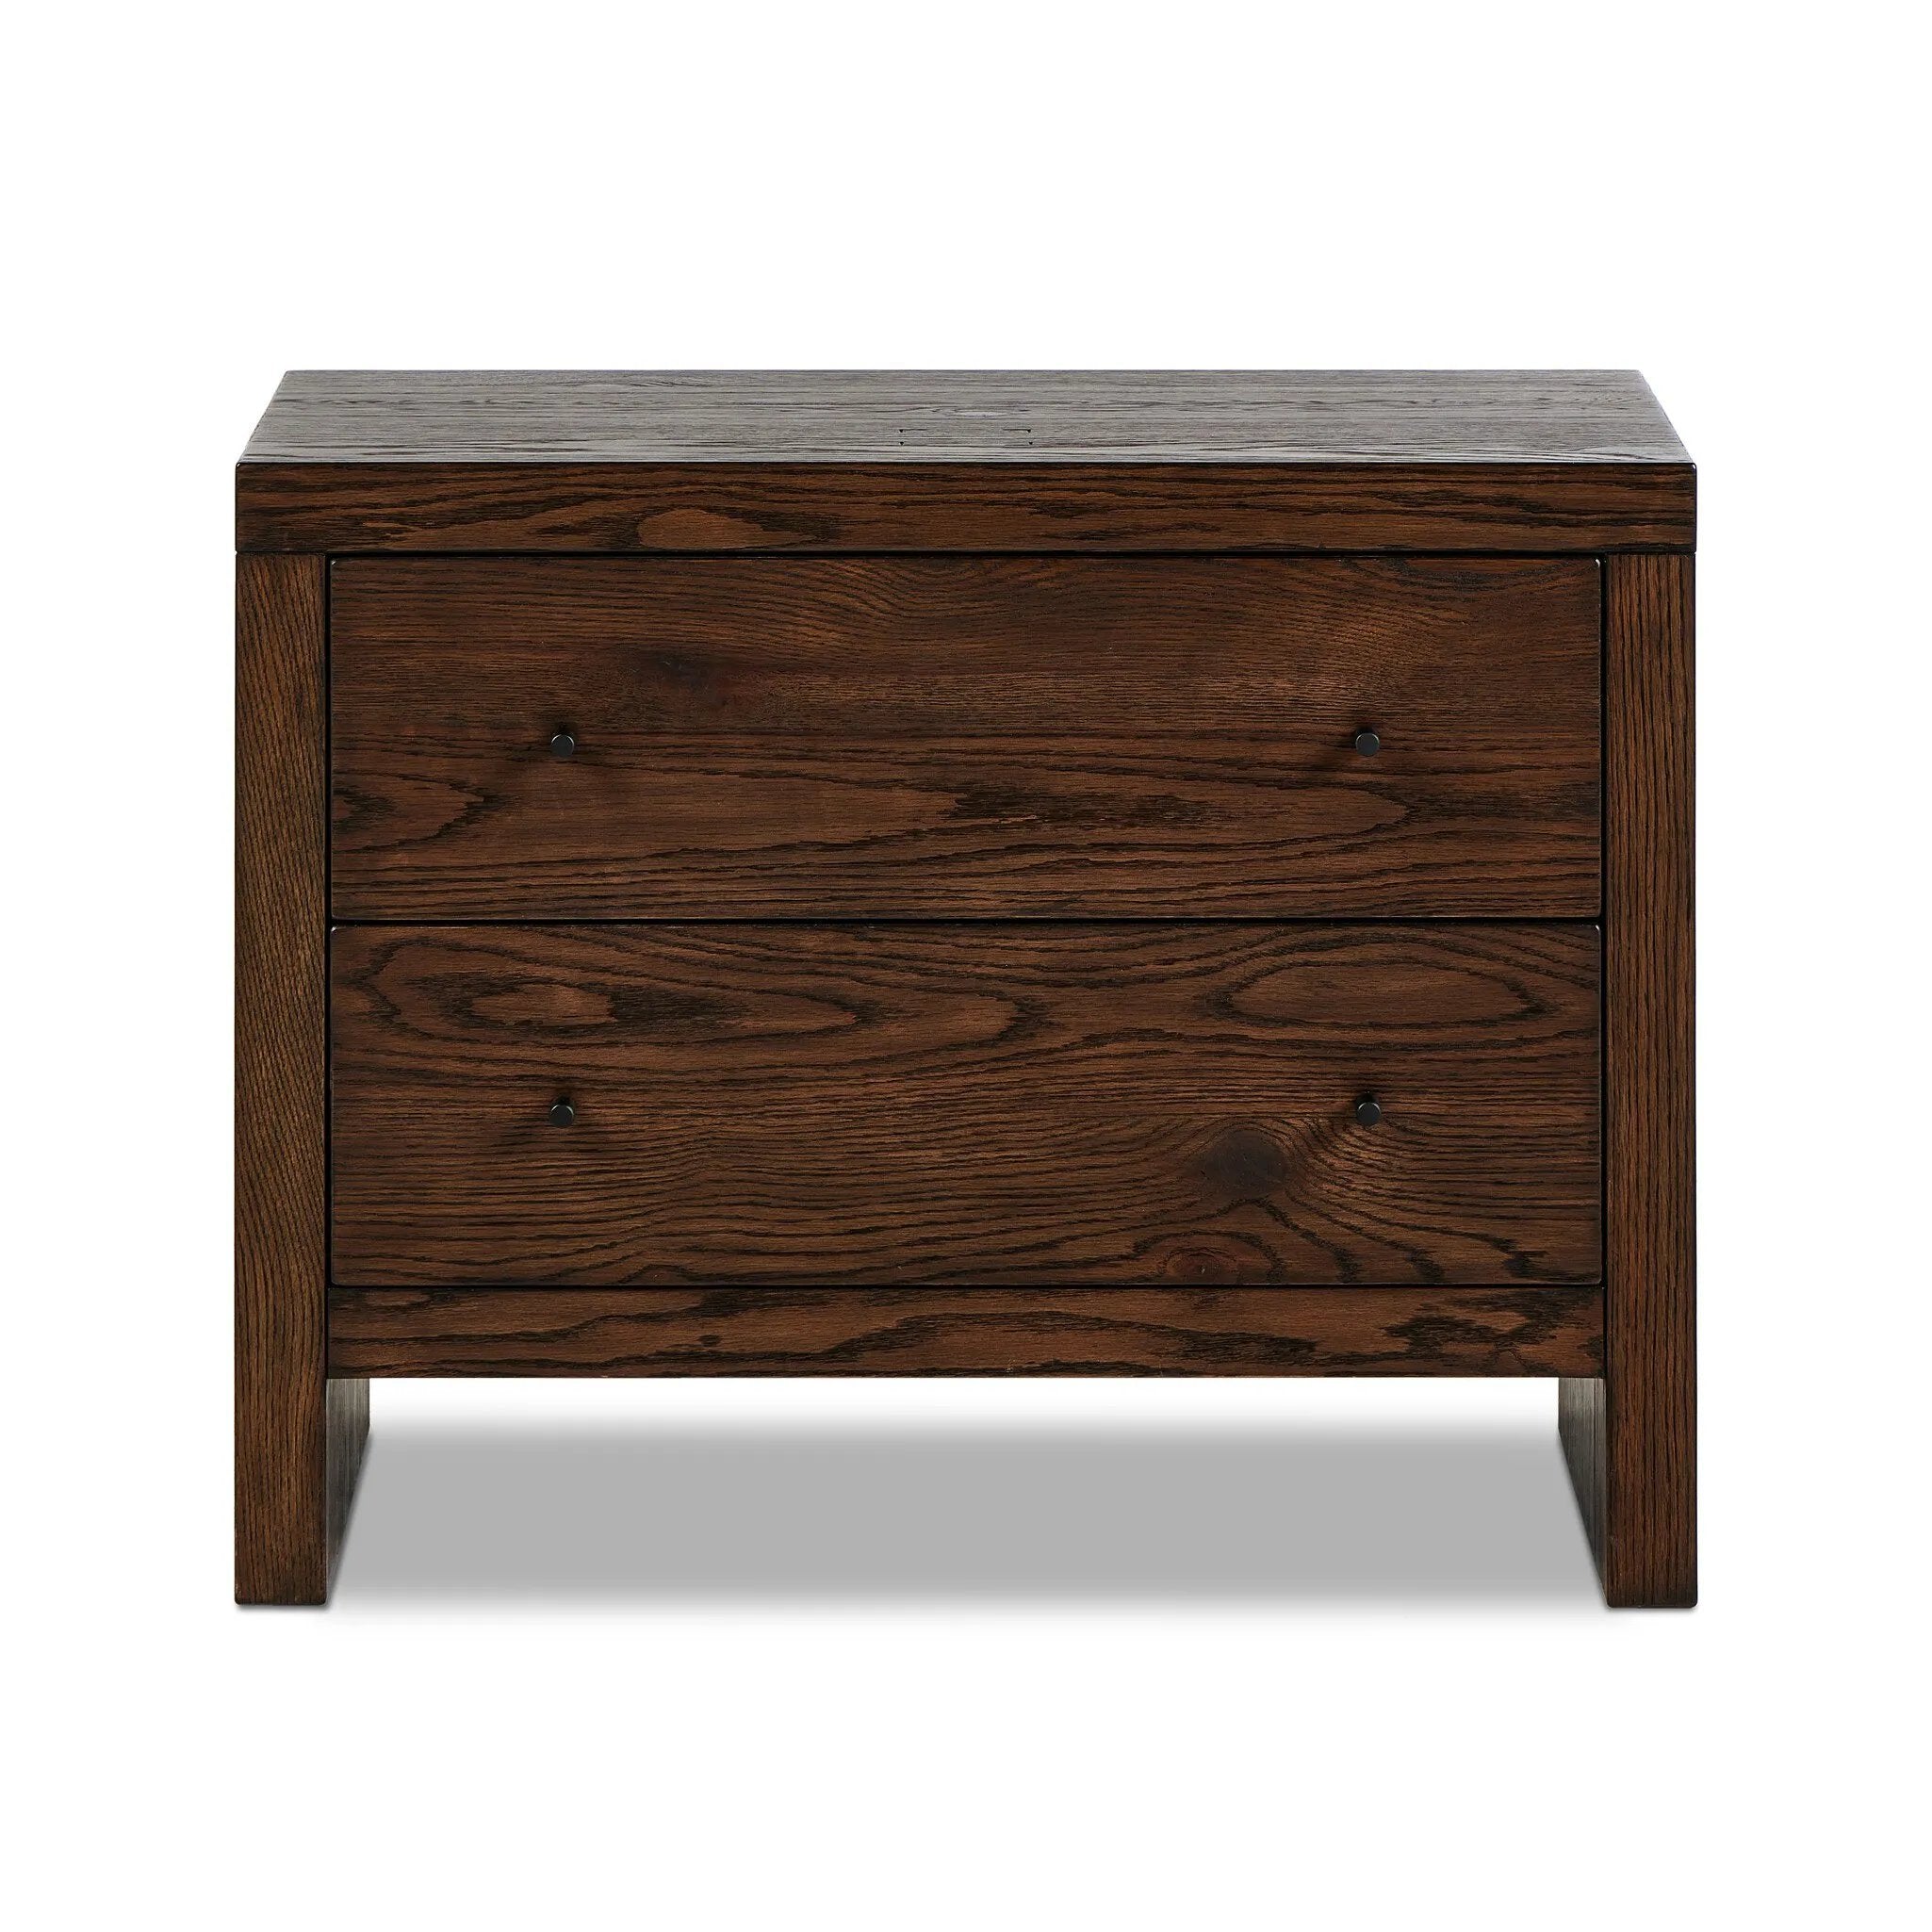 Straight planks of solid umber oak and veneer encase this spacious dresser for an understated modern look. Deep wood grain adds natural character. Invisible wireless charging for Android and Apple products.Collection: Hamilto Amethyst Home provides interior design, new home construction design consulting, vintage area rugs, and lighting in the Omaha metro area.